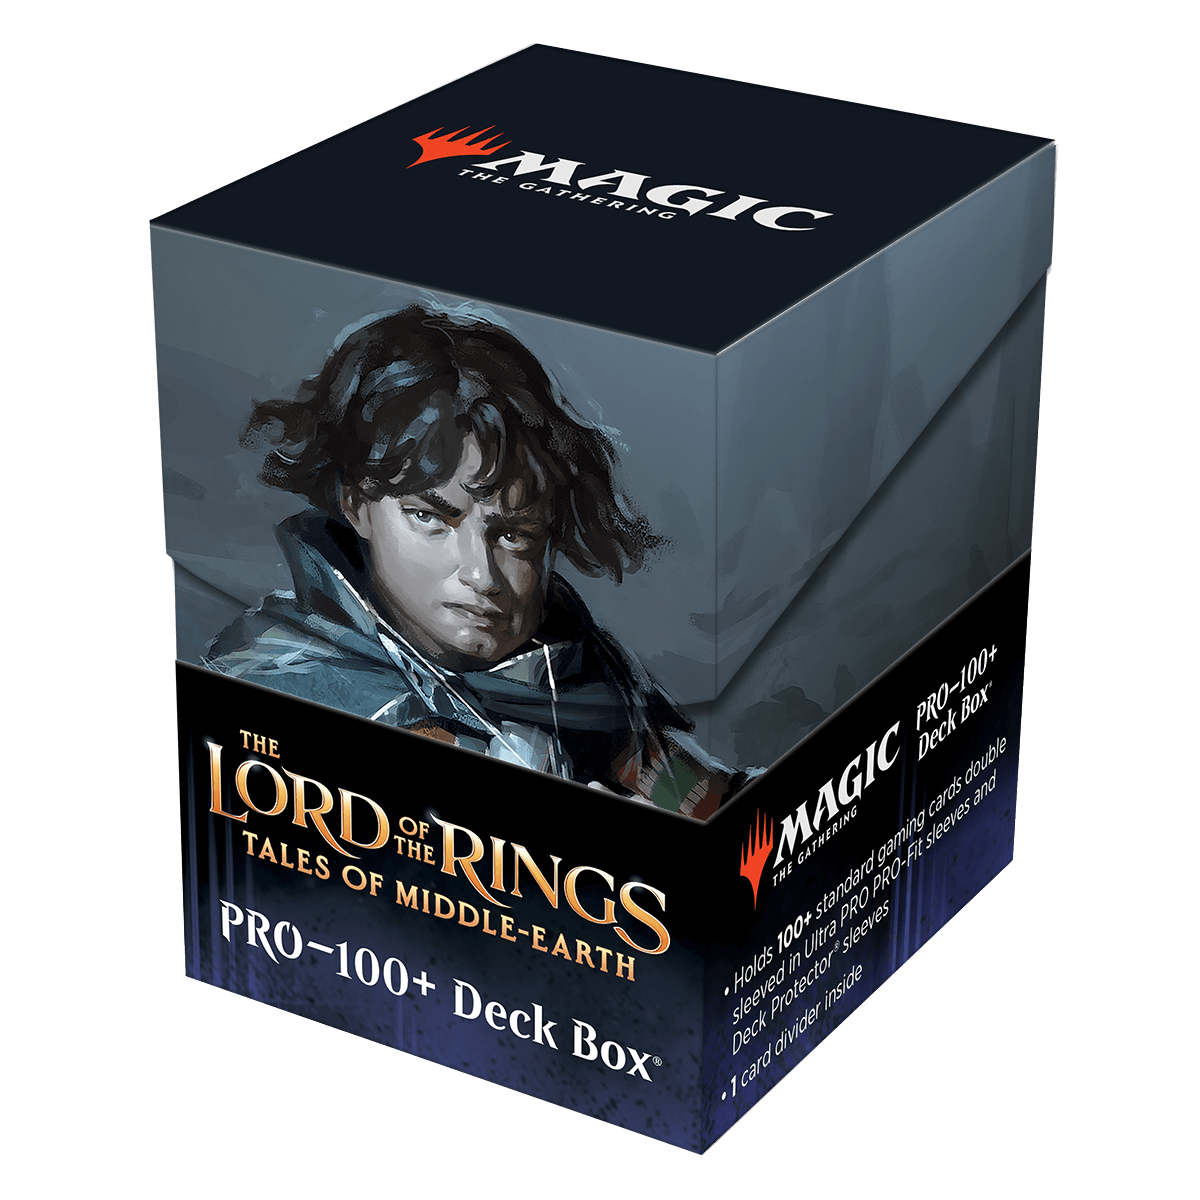 Ultra PRO: 100+ Deck Box - The Lord of the Rings (Frodo, Adventurous Hobbit)